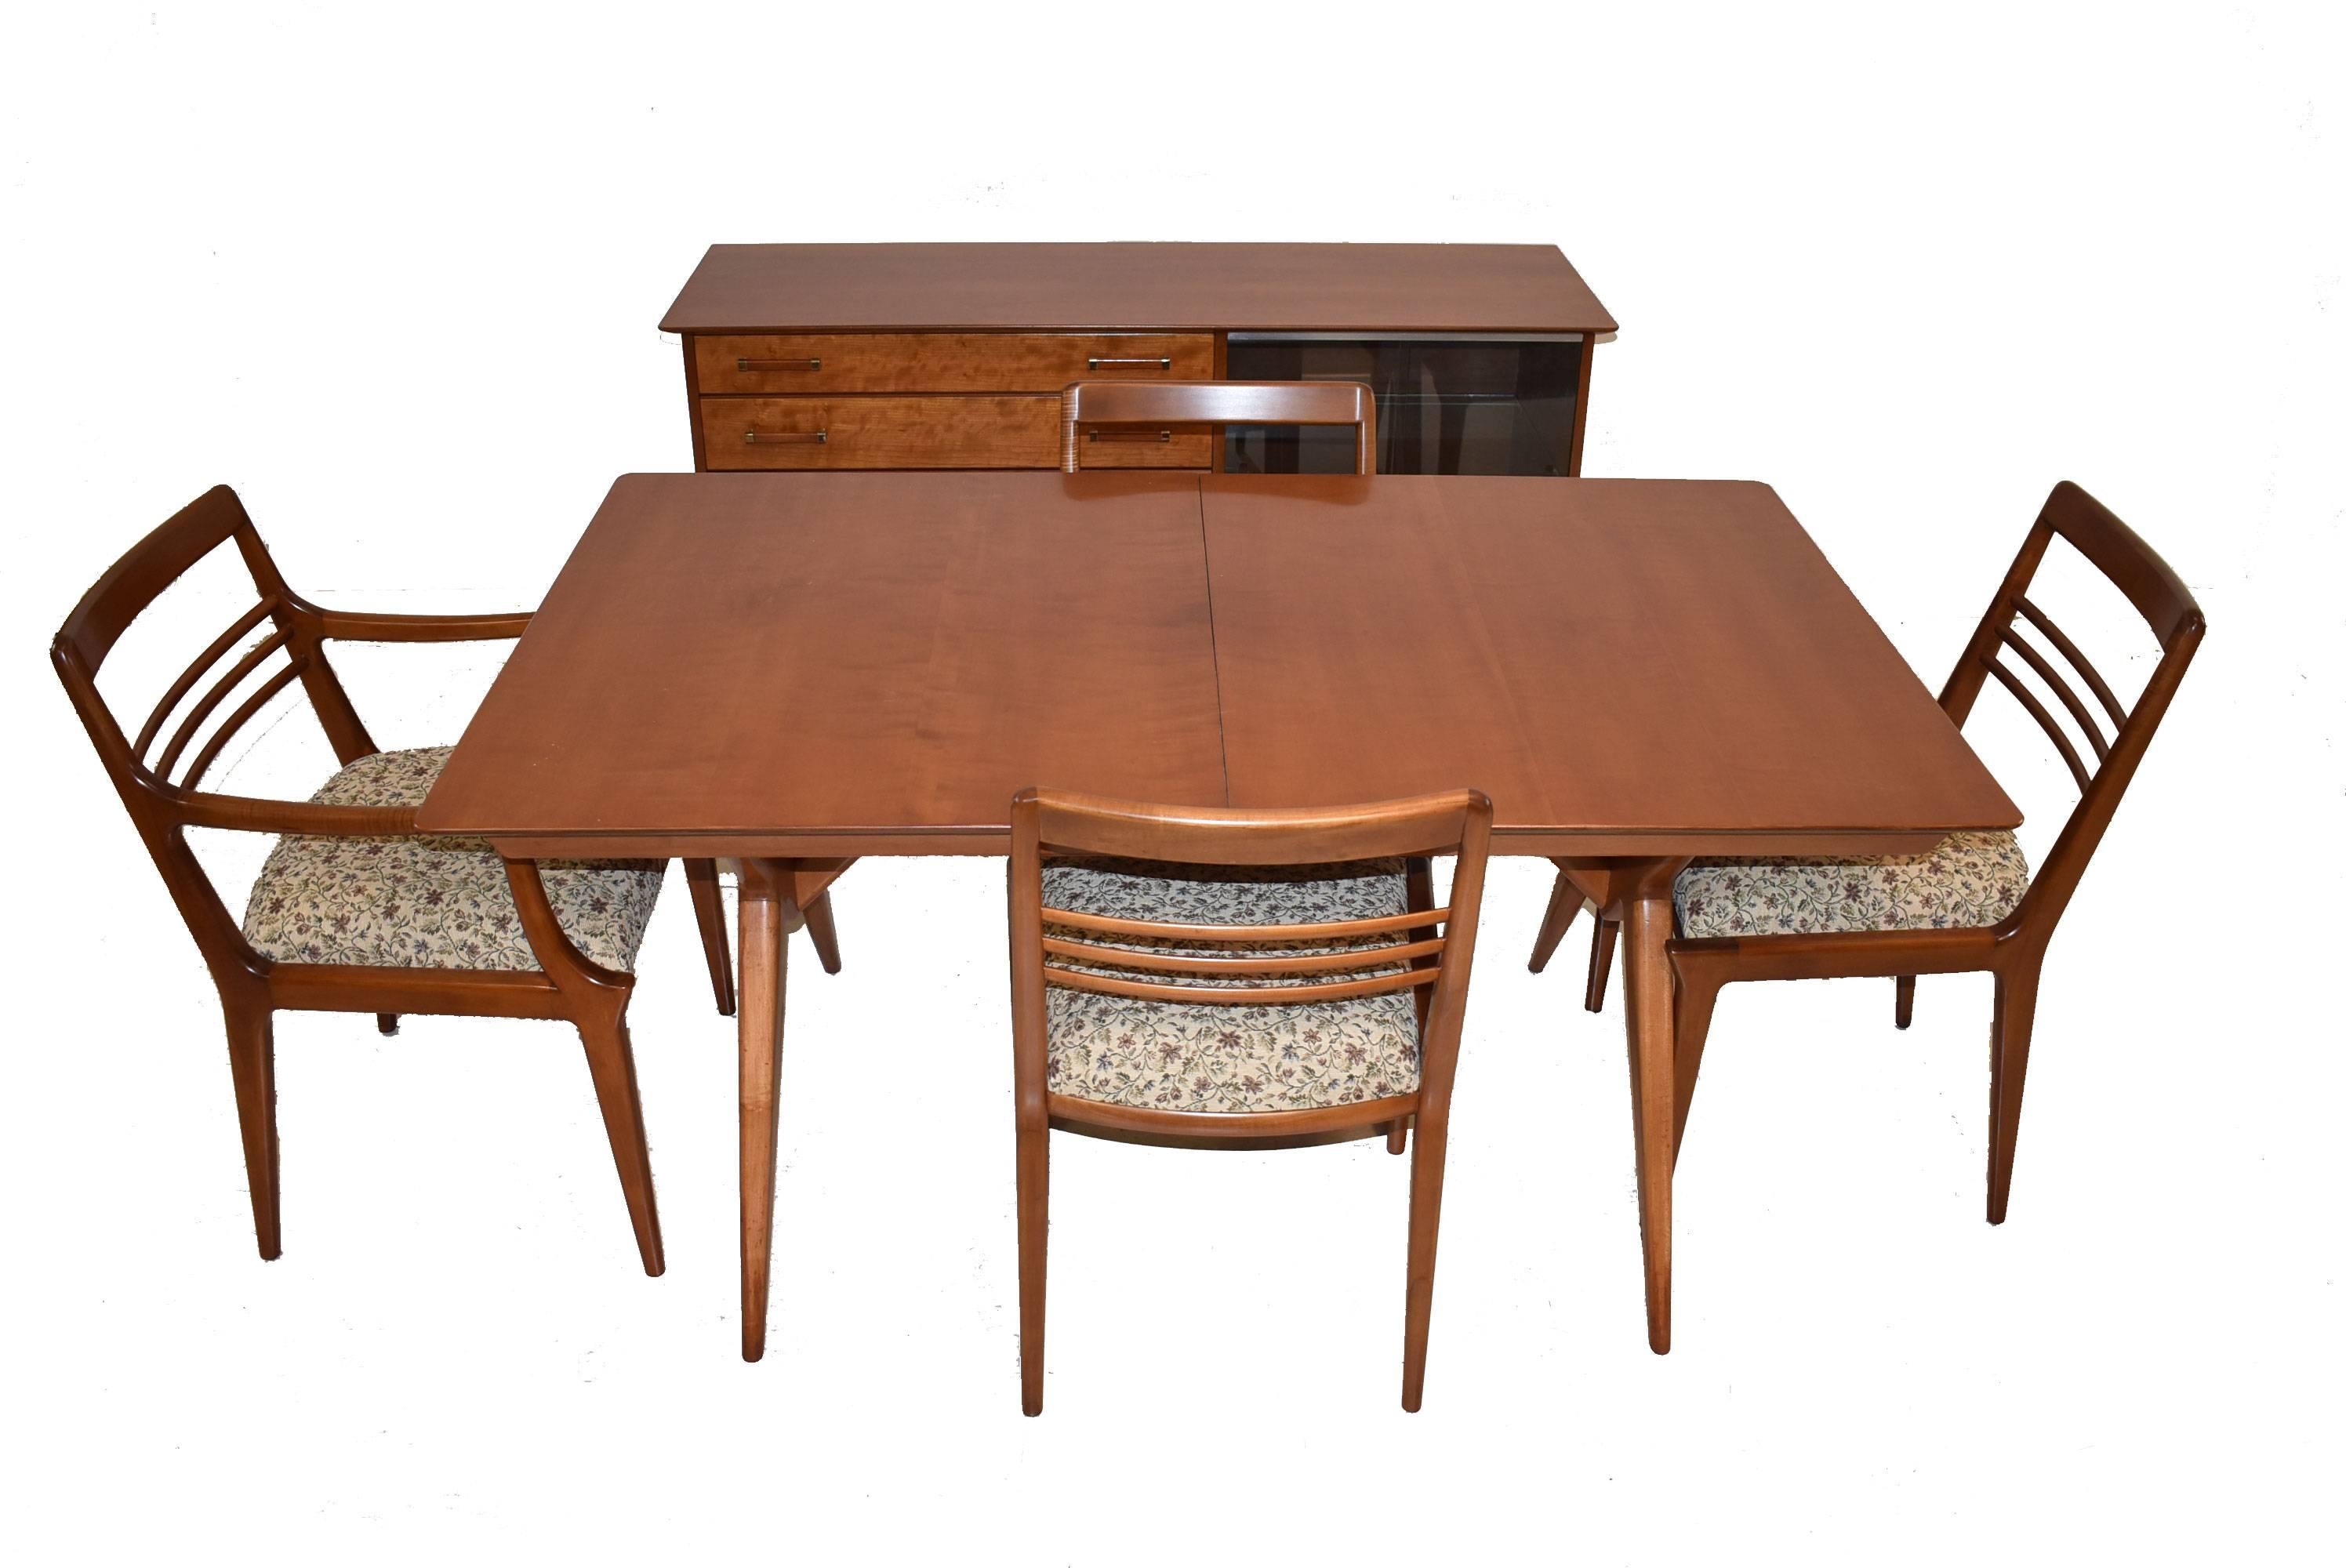 A fantastic Mid-Century dining room table and chairs by Johnson Furniture Co. This beautiful cherry set features great lines and a stylish modern design. It is in great condition and has been refinished. There are 3 - 11